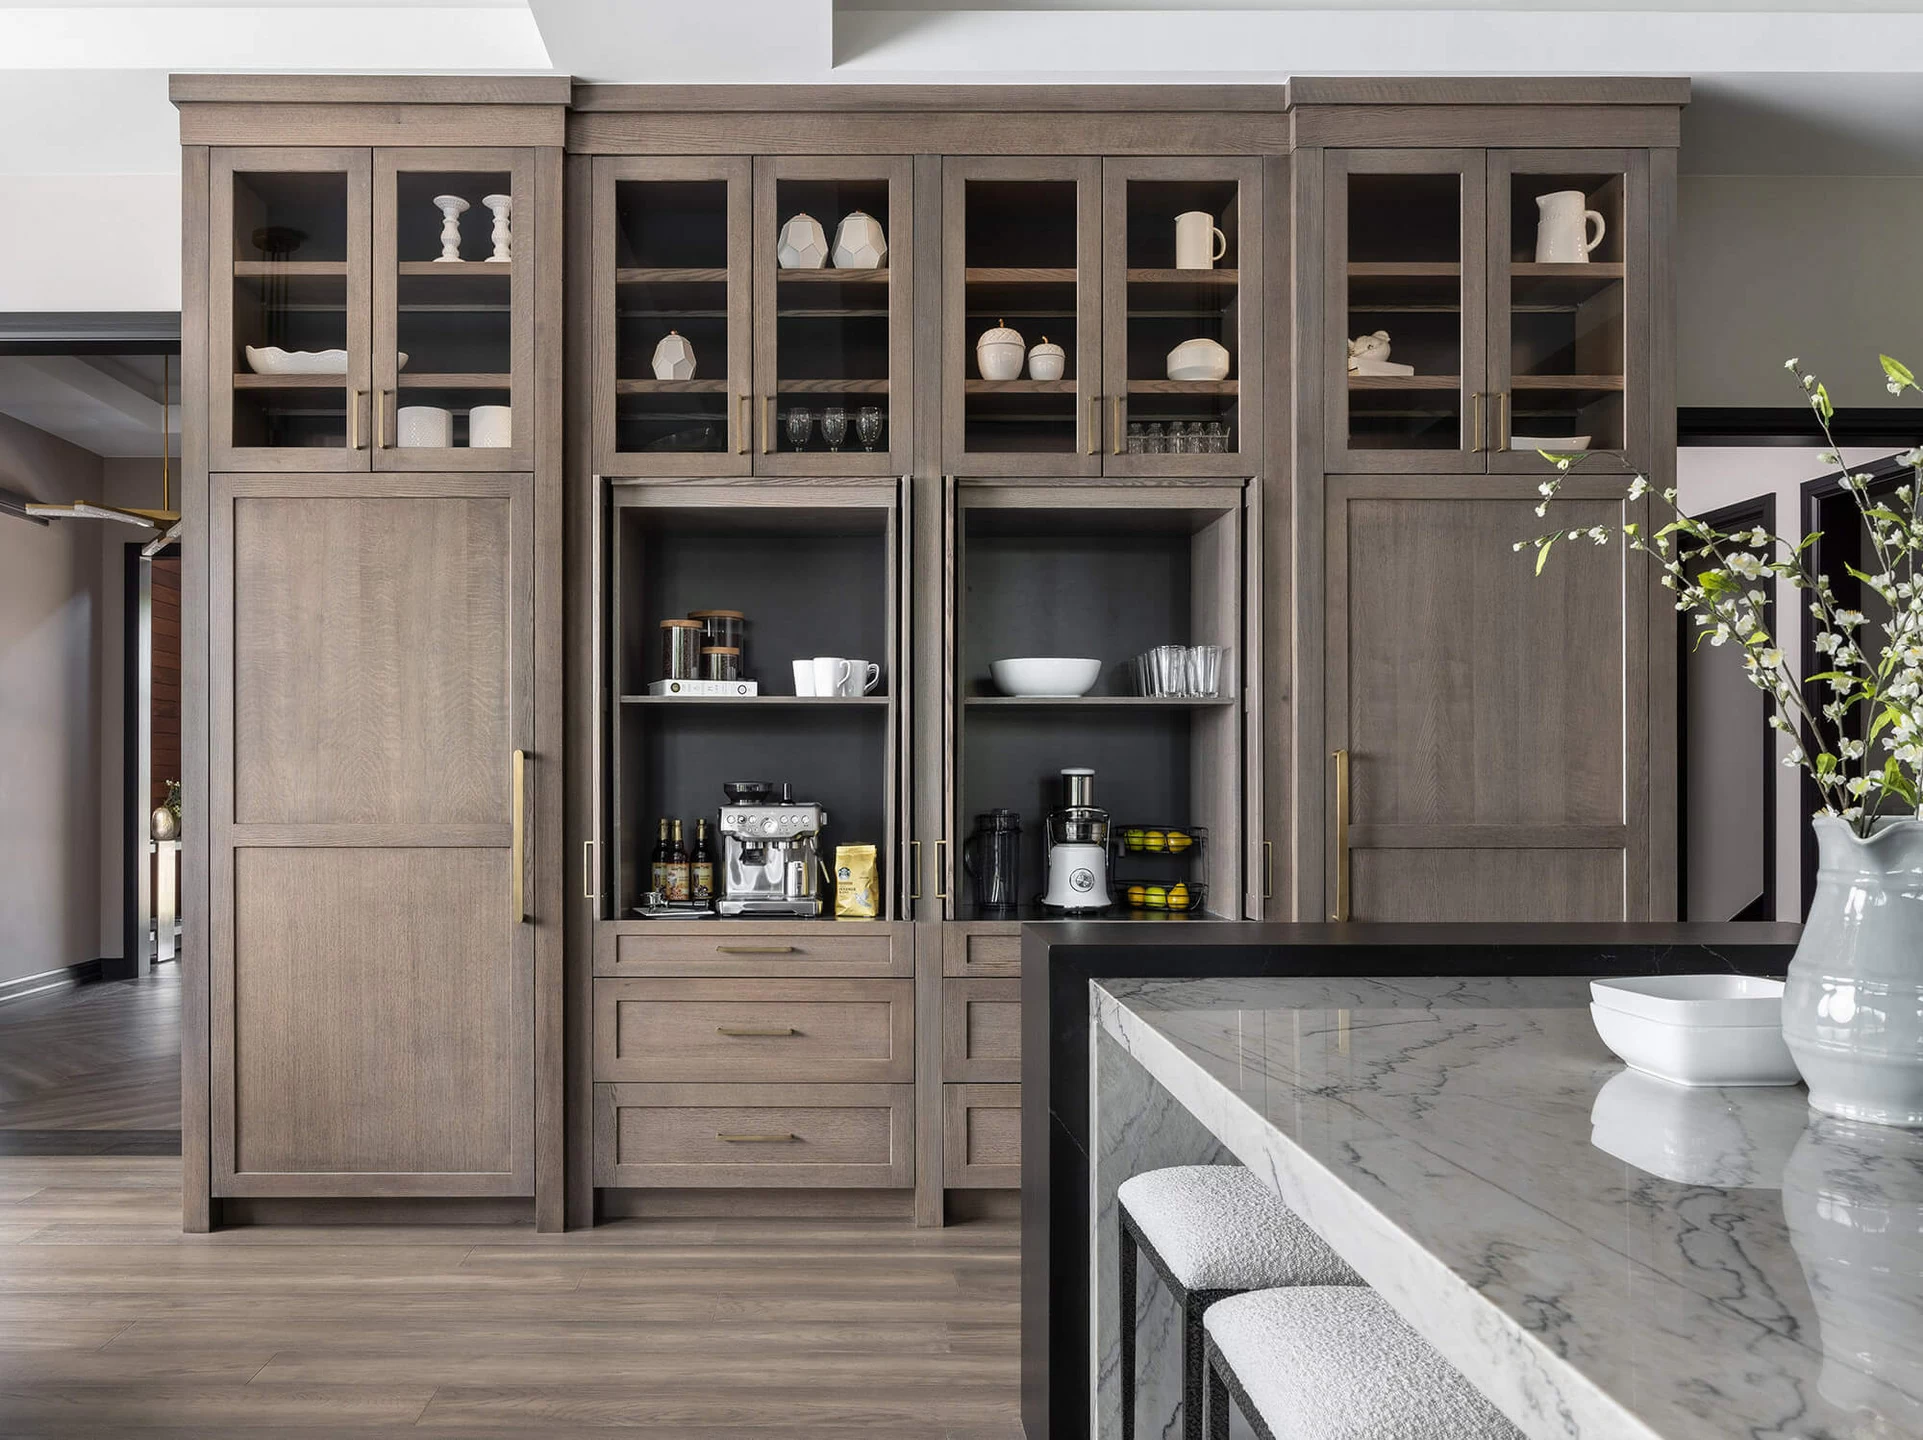 The cabinets open to reveal 2 Beautiful, hidden workstations using larder cabinets. One cabinet is used as a coffee station and the other as a smoothie station.